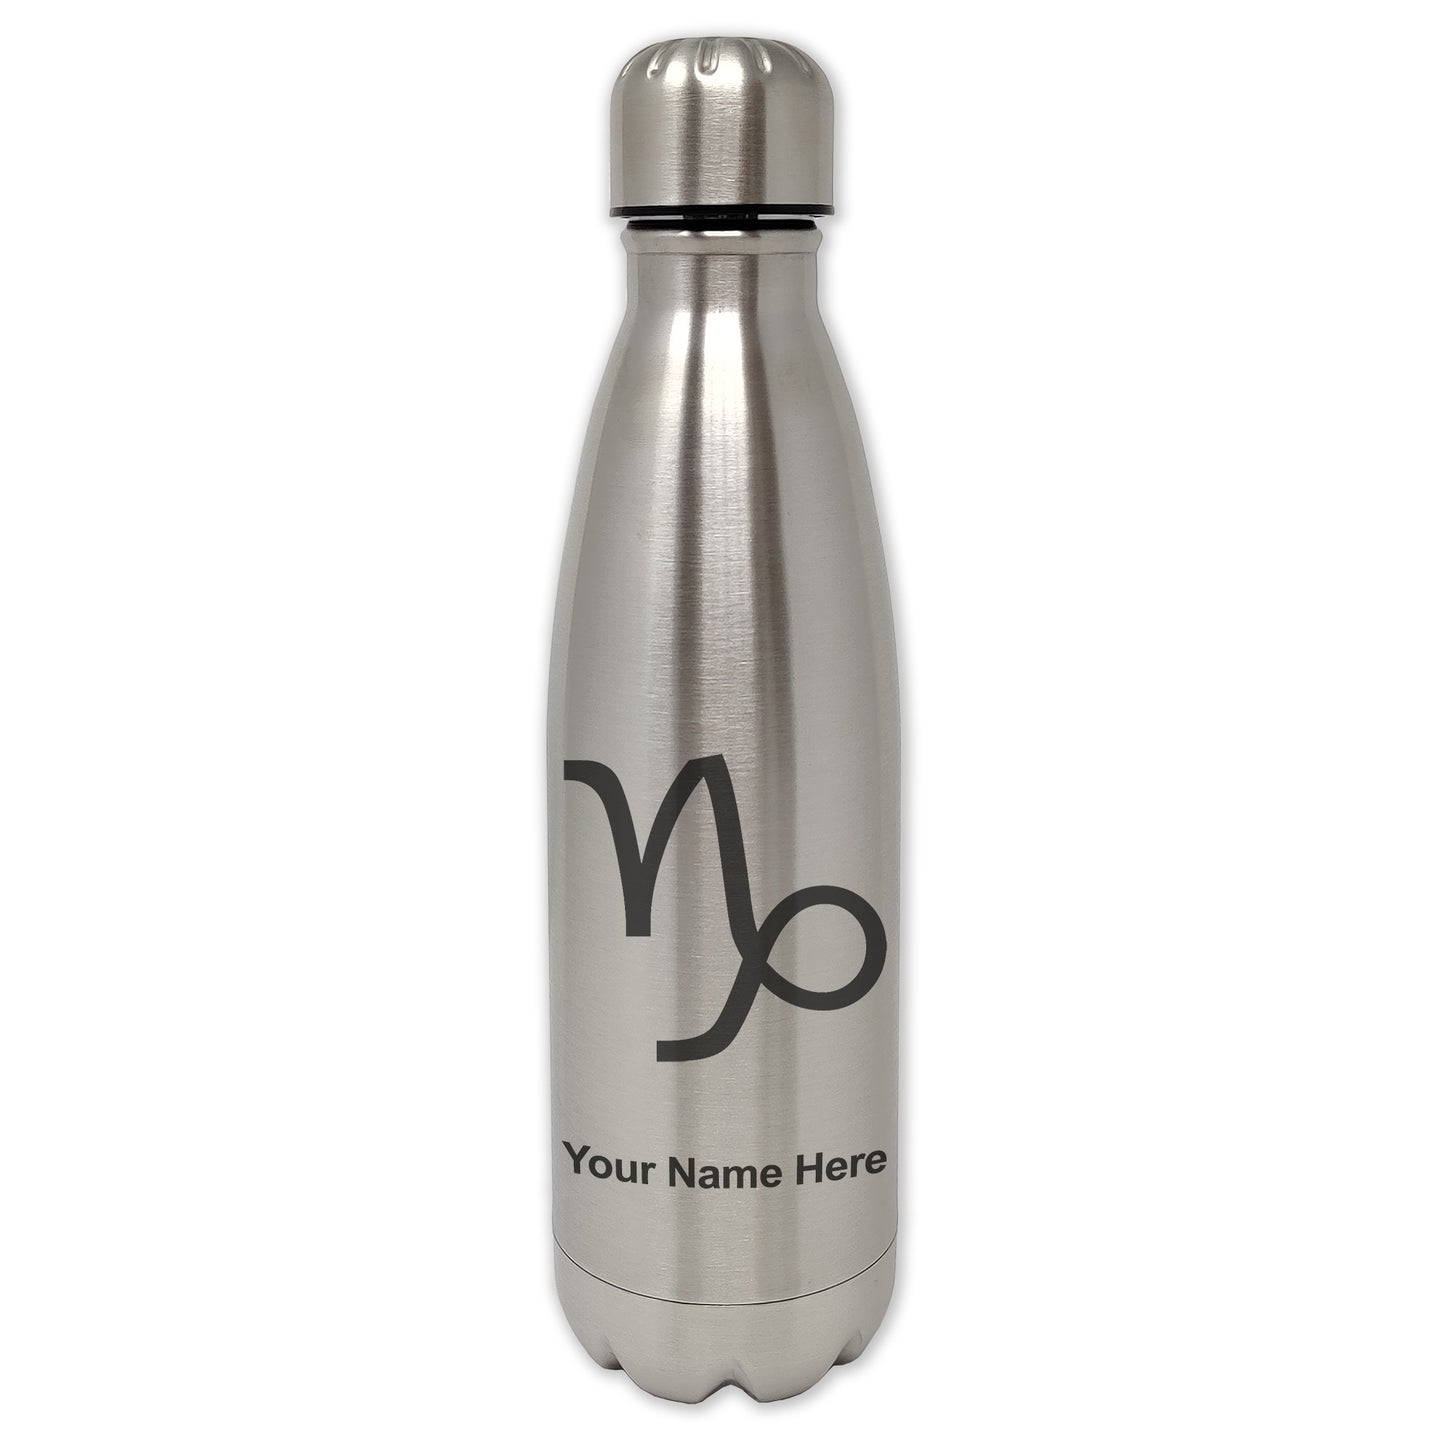 LaserGram Double Wall Water Bottle, Zodiac Sign Capricorn, Personalized Engraving Included